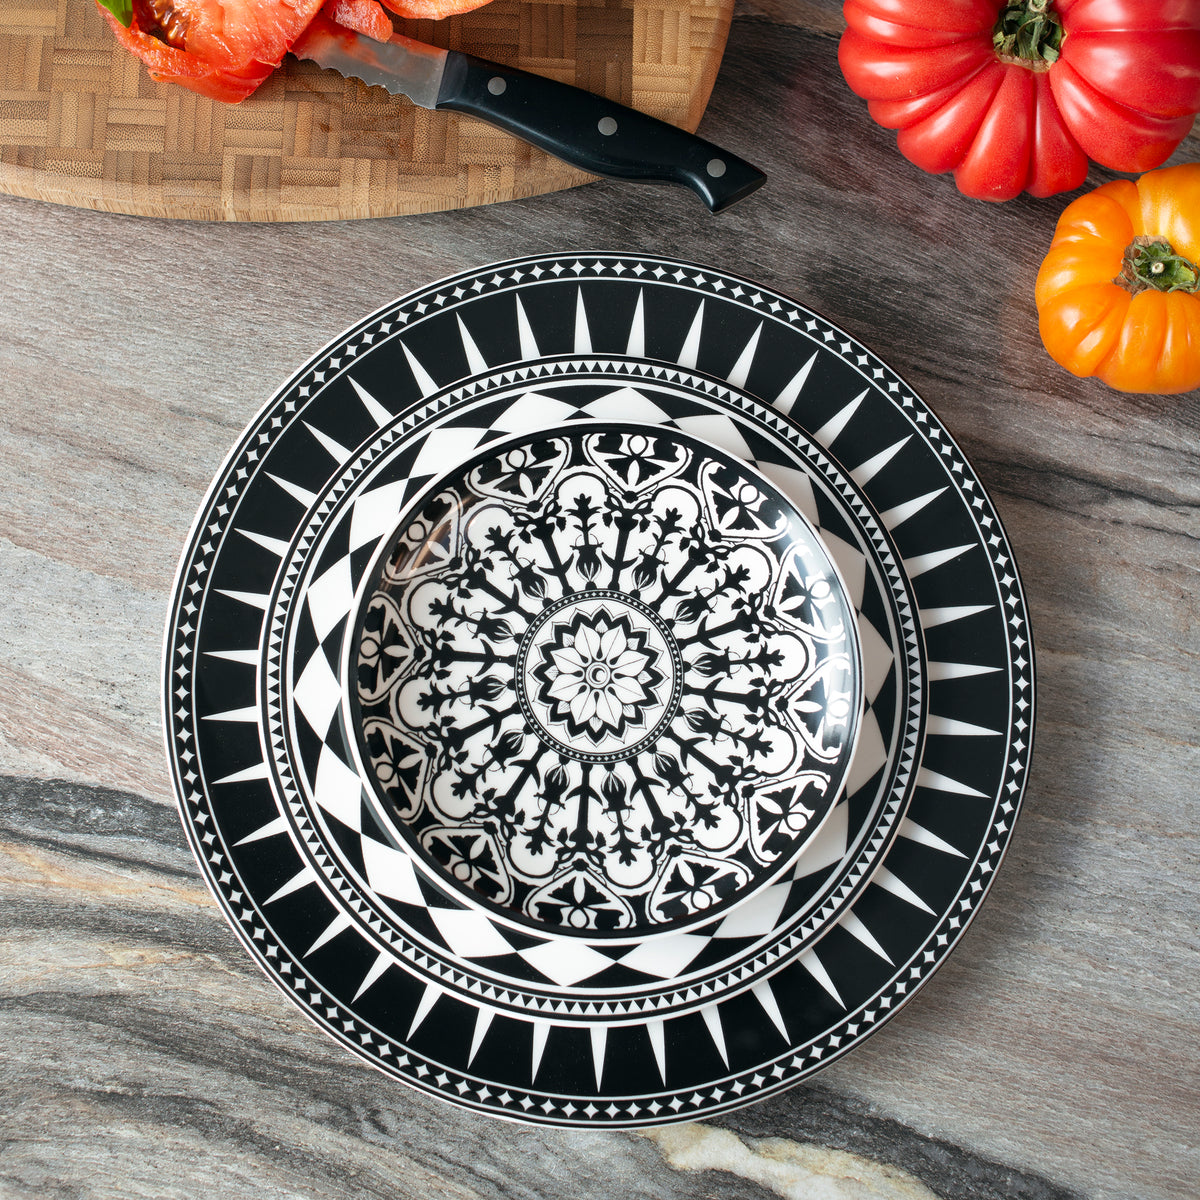 Three black and white patterned **Casablanca Small Plates** from **Caskata Artisanal Home** stacked on a marble surface, next to two colorful tomatoes and a wooden chopping board with a knife.